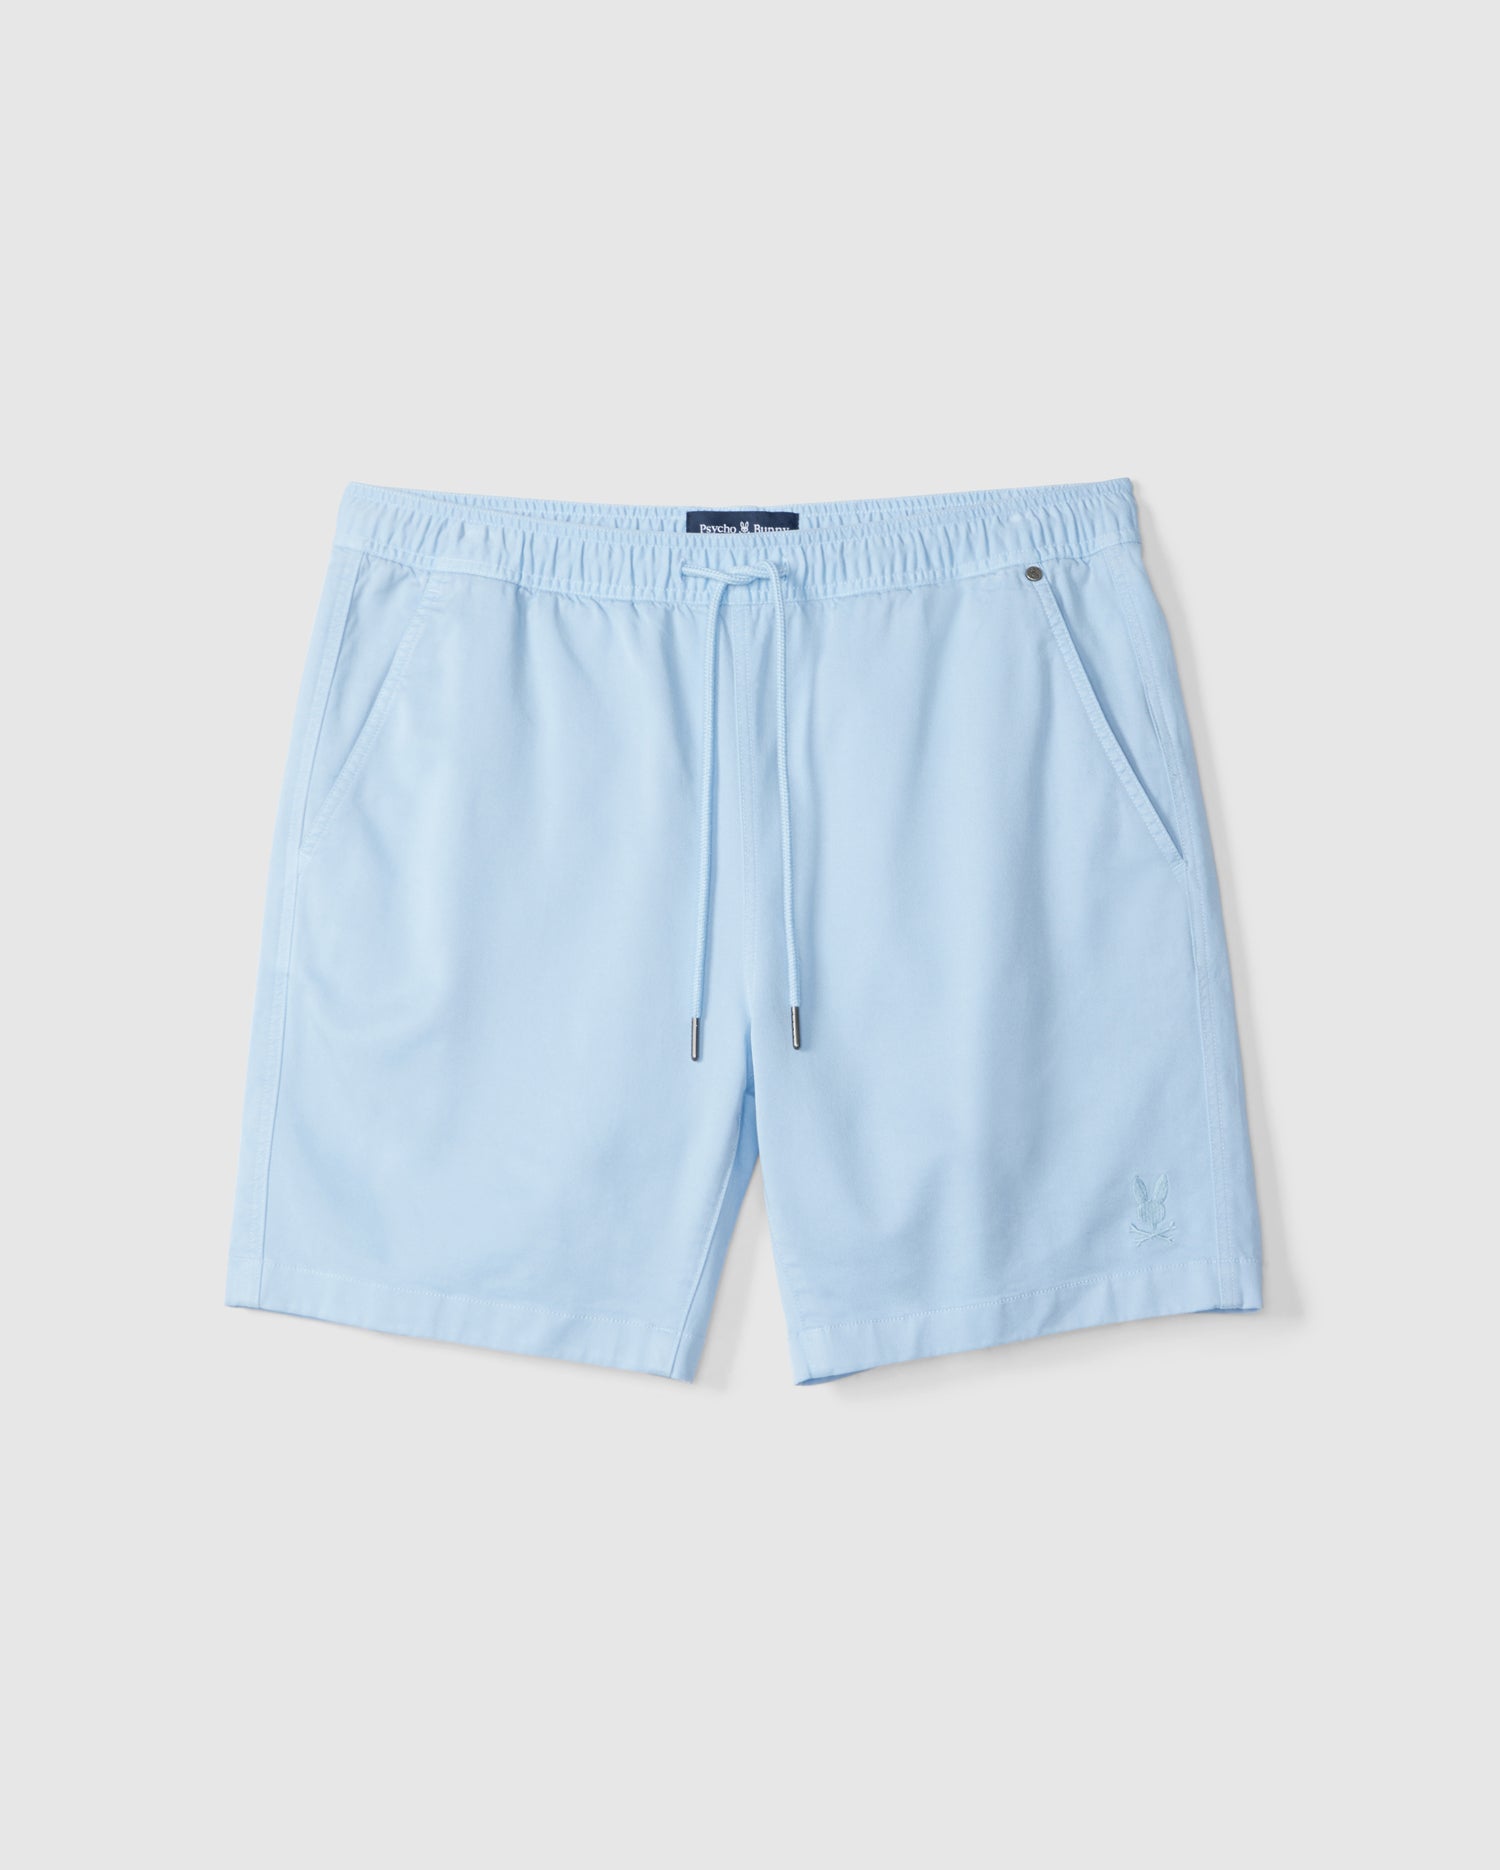 Light blue swim shorts with an elastic waistband and drawstring, displayed on a plain white background. The Psycho Bunny MENS WILLIS STRETCH TENCEL SHORT - B6R239Y1WB feature a small embroidered logo on the left leg.